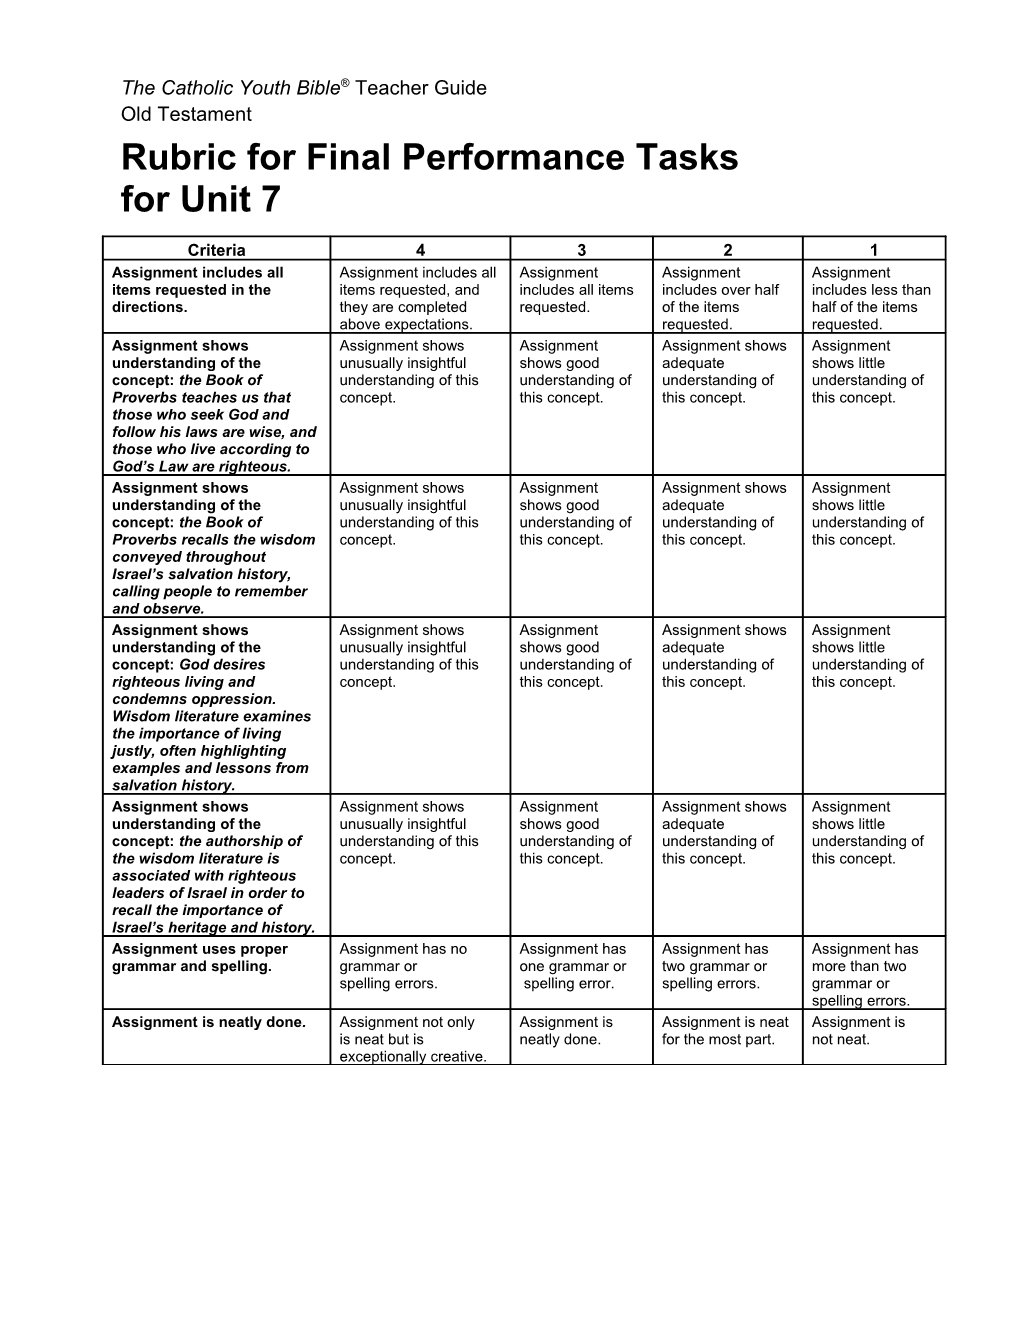 Rubric for Final Performance Tasks for Unit 7Page 1